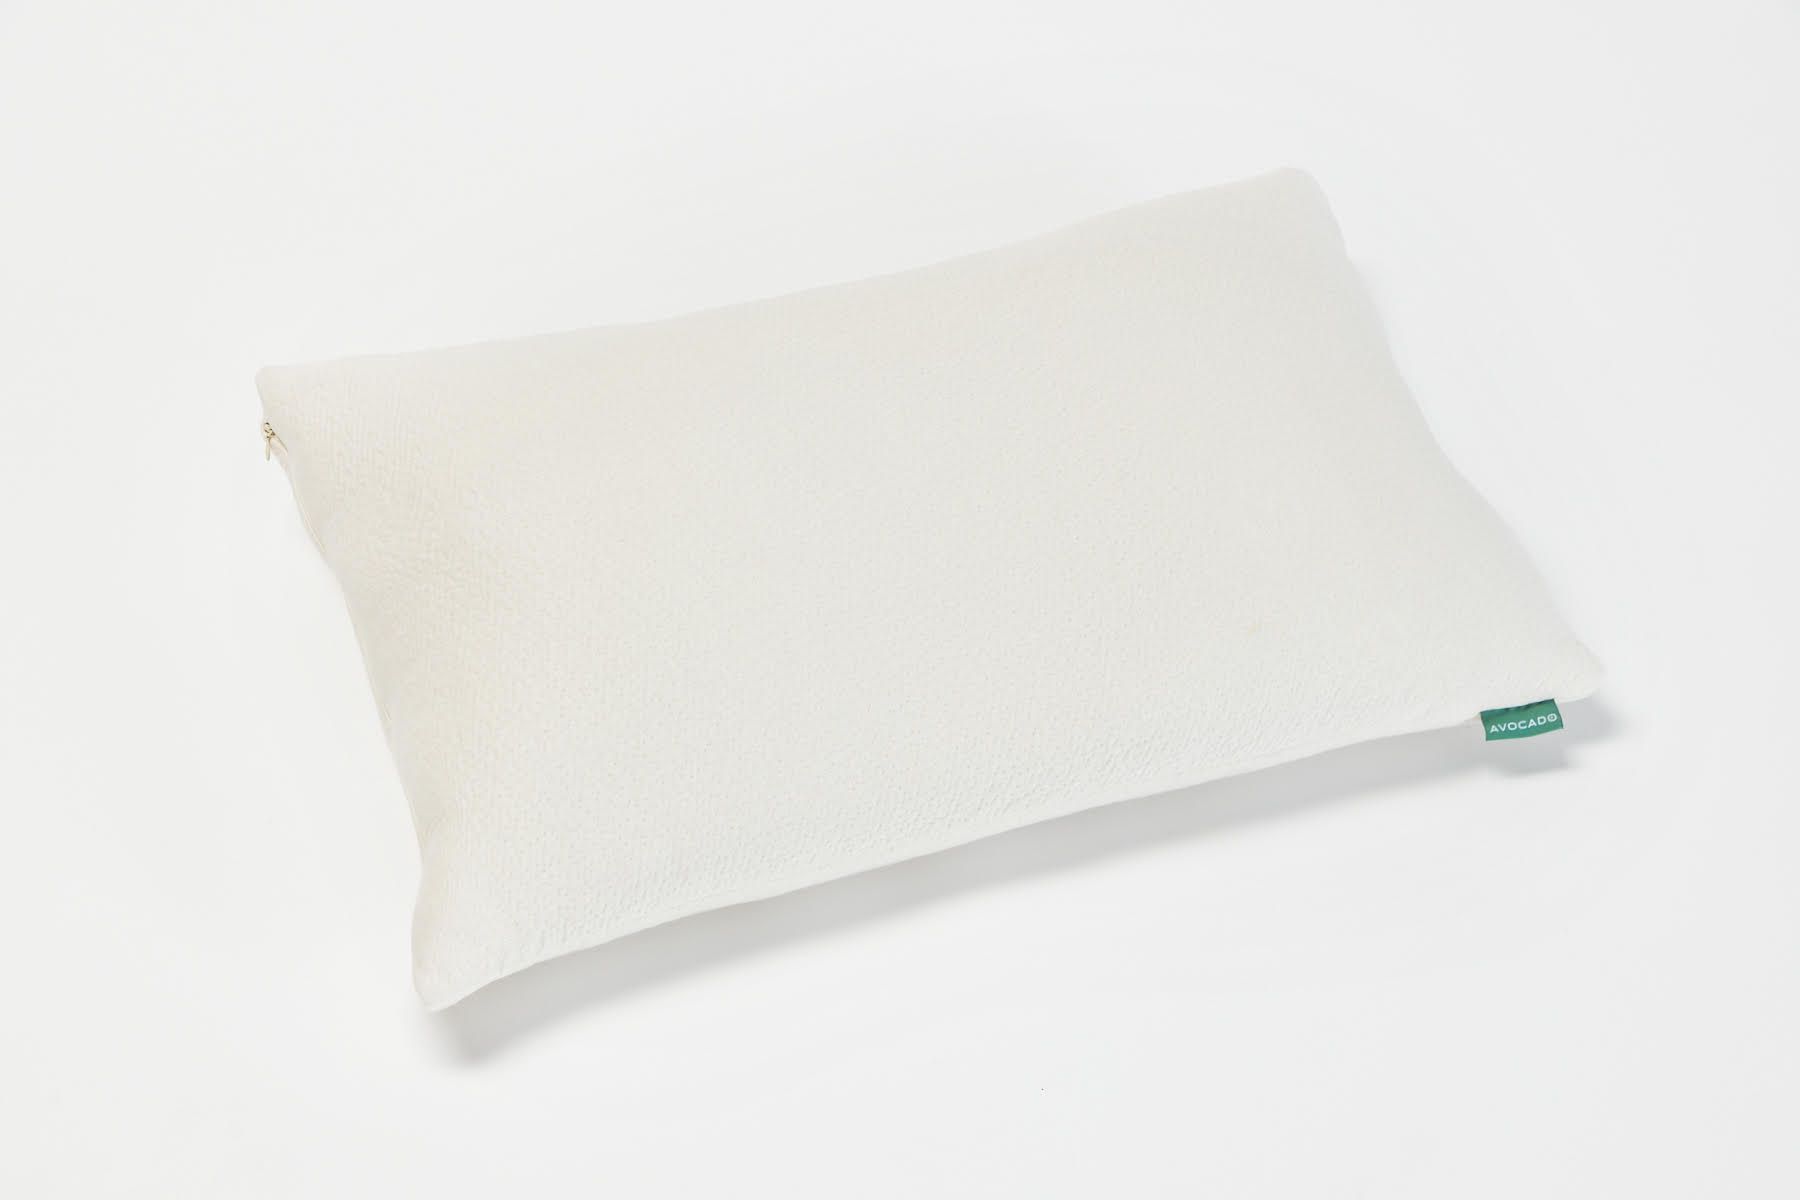 Best pillow: The Avocado Green Pillows in white with a green logo tag